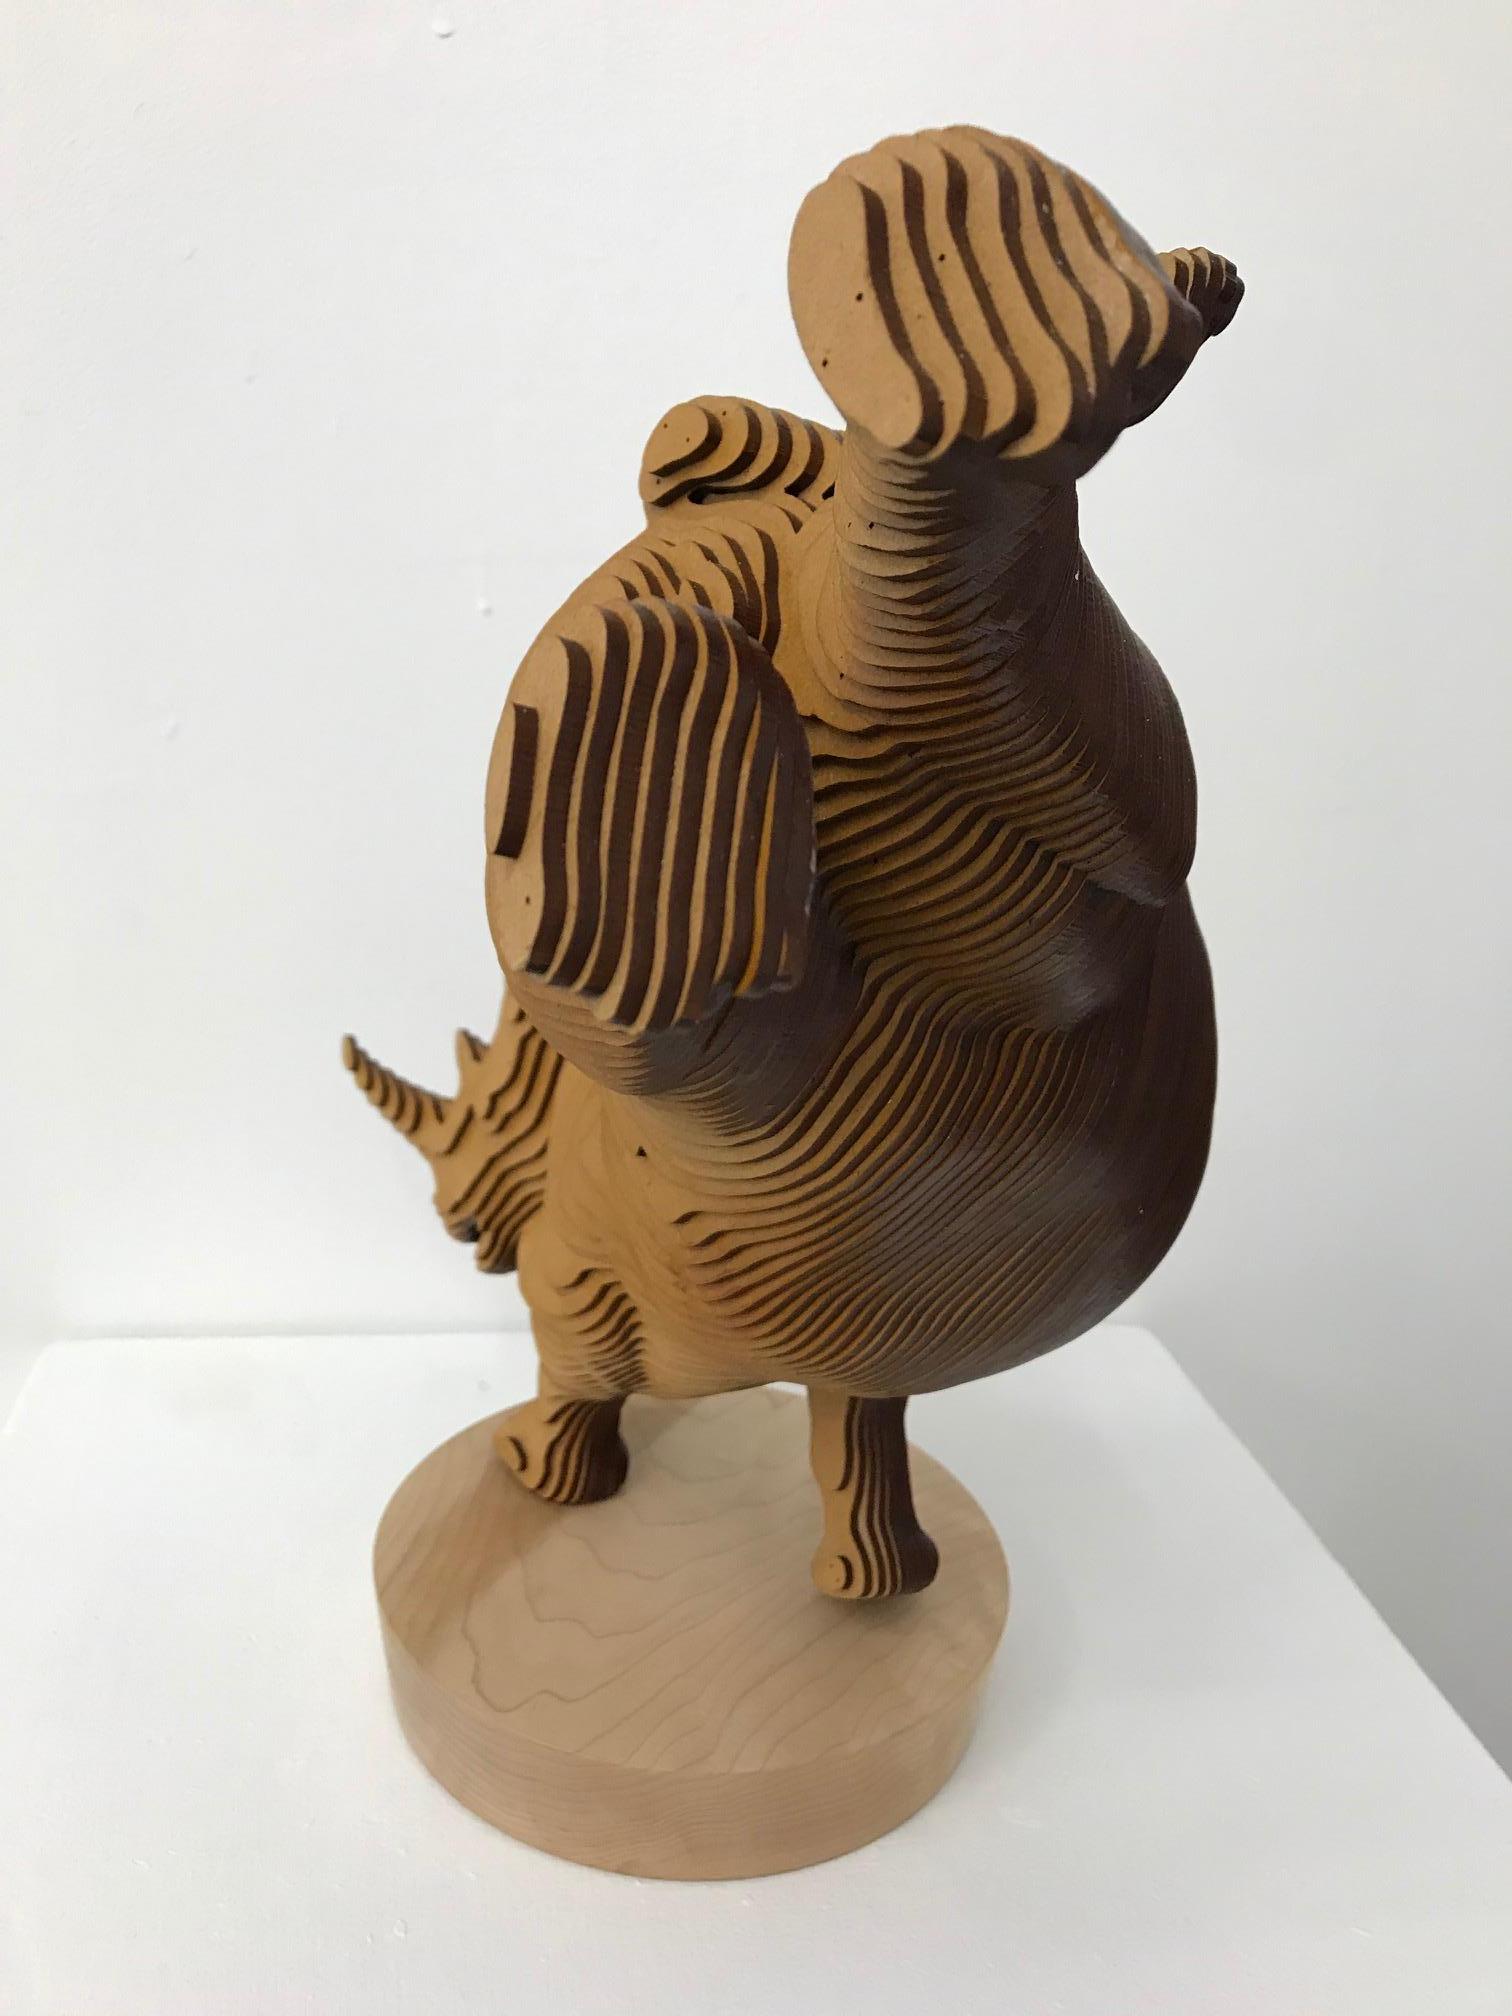 Ballerhino..Contemporary whimsical animal sculpture, wood slices, dancing rhino For Sale 1